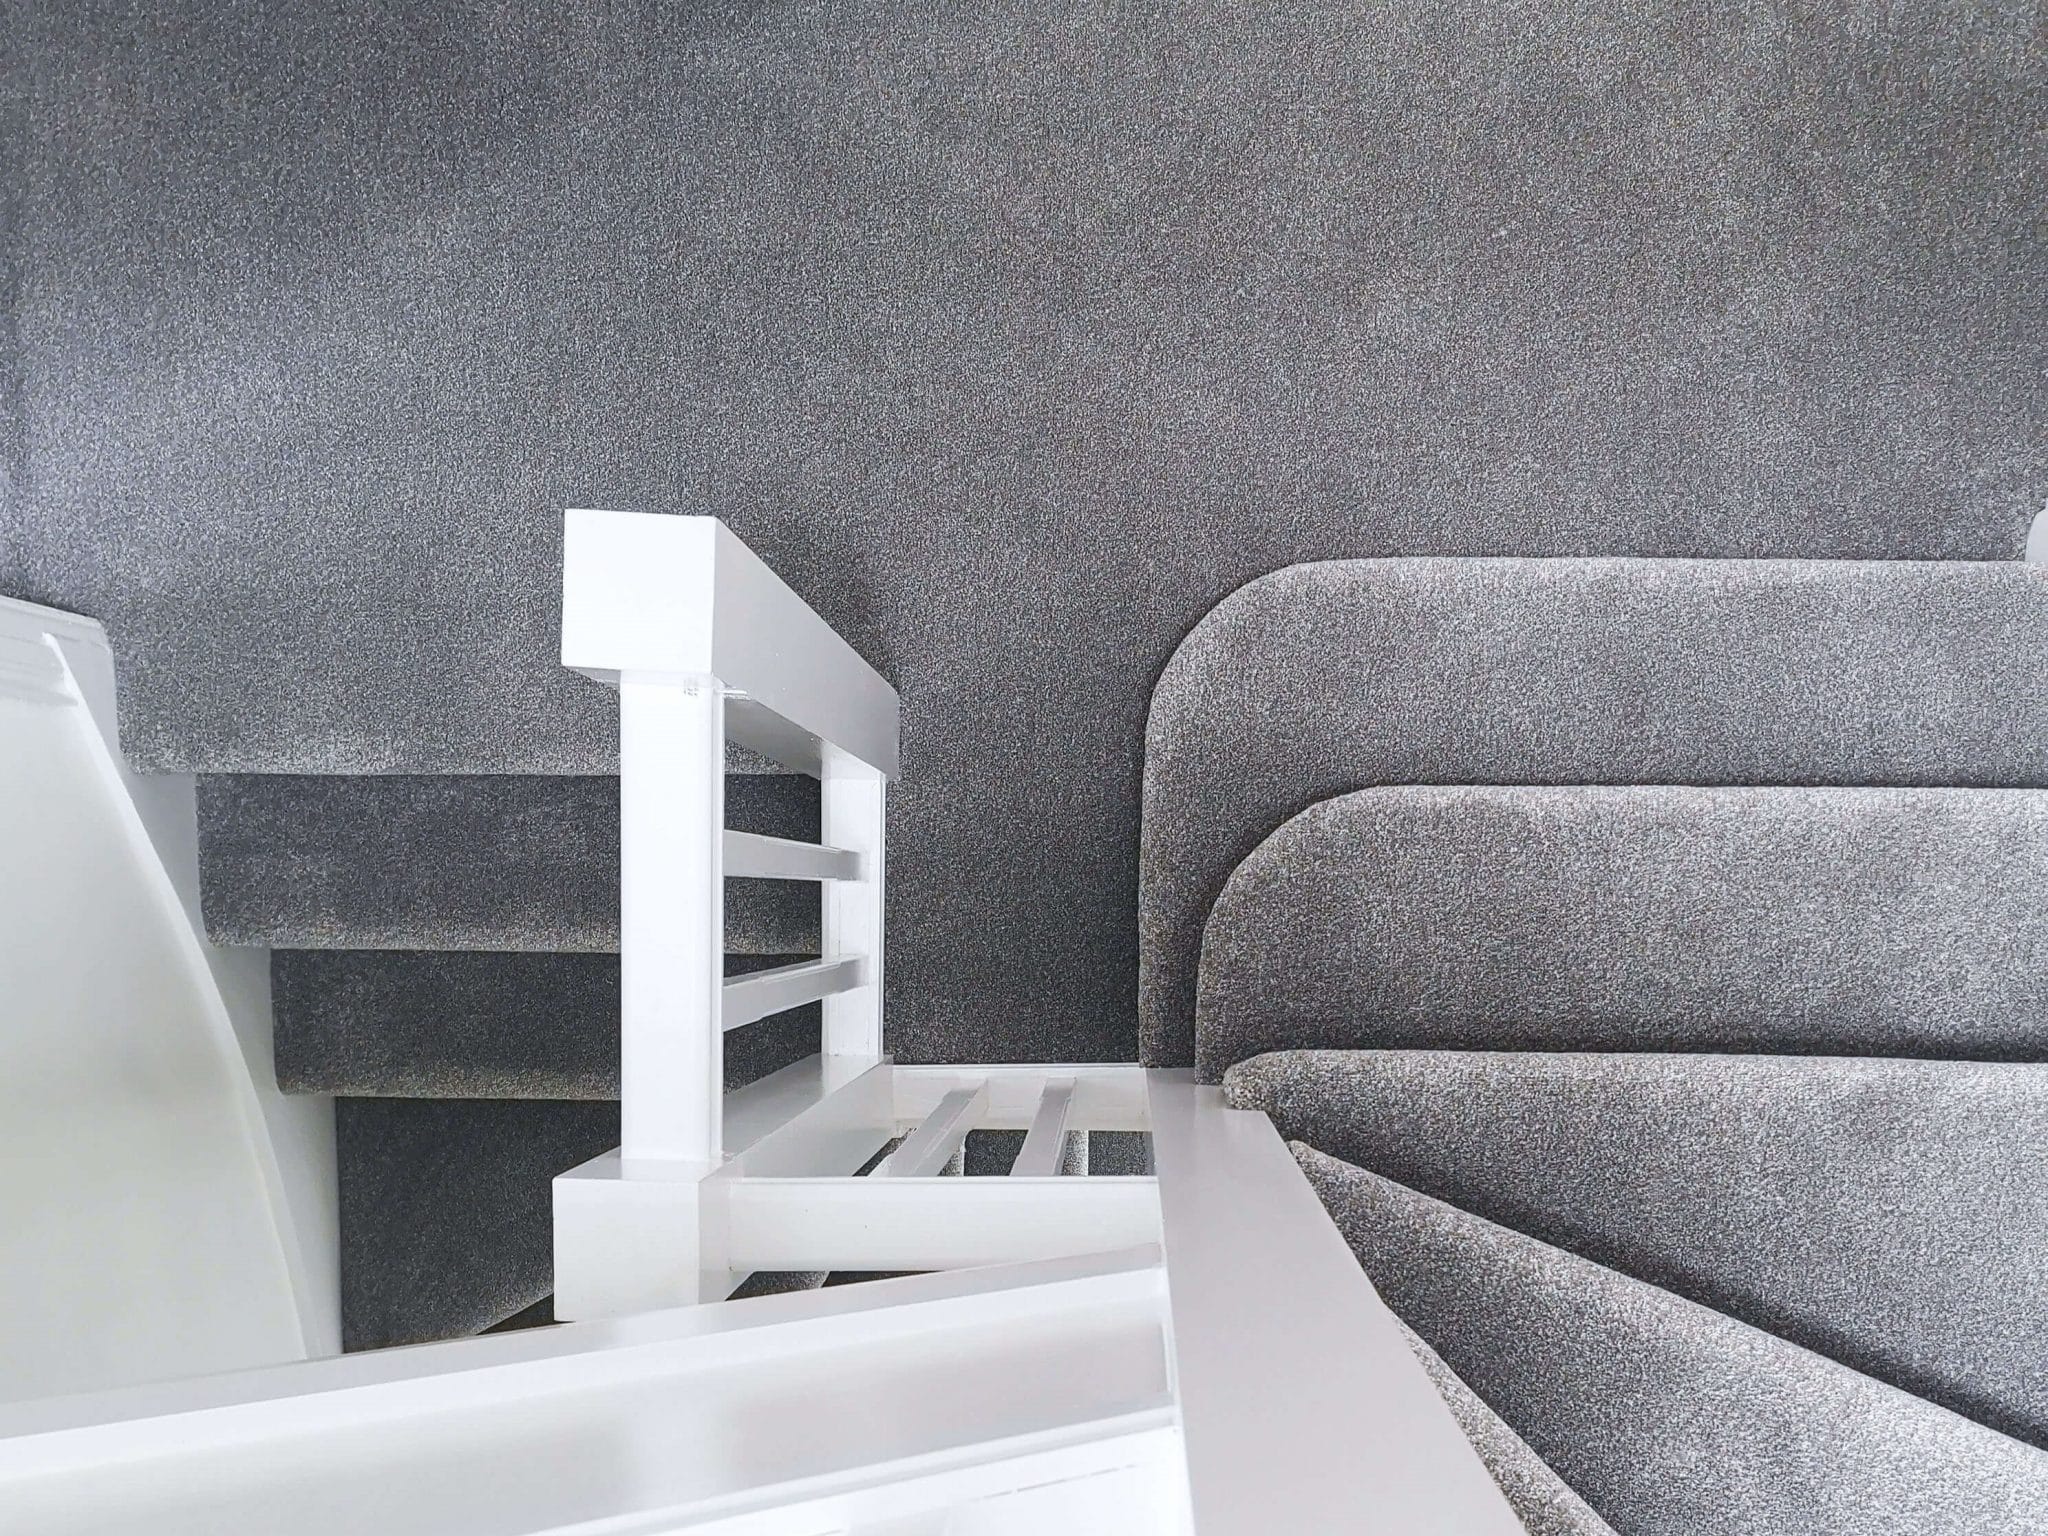 Image of a modern interior stairway with white balusters and handrail alongside a curved grey carpeted staircase. The walls are textured with a speckled grey finish, complementing the carpet's colour and texture